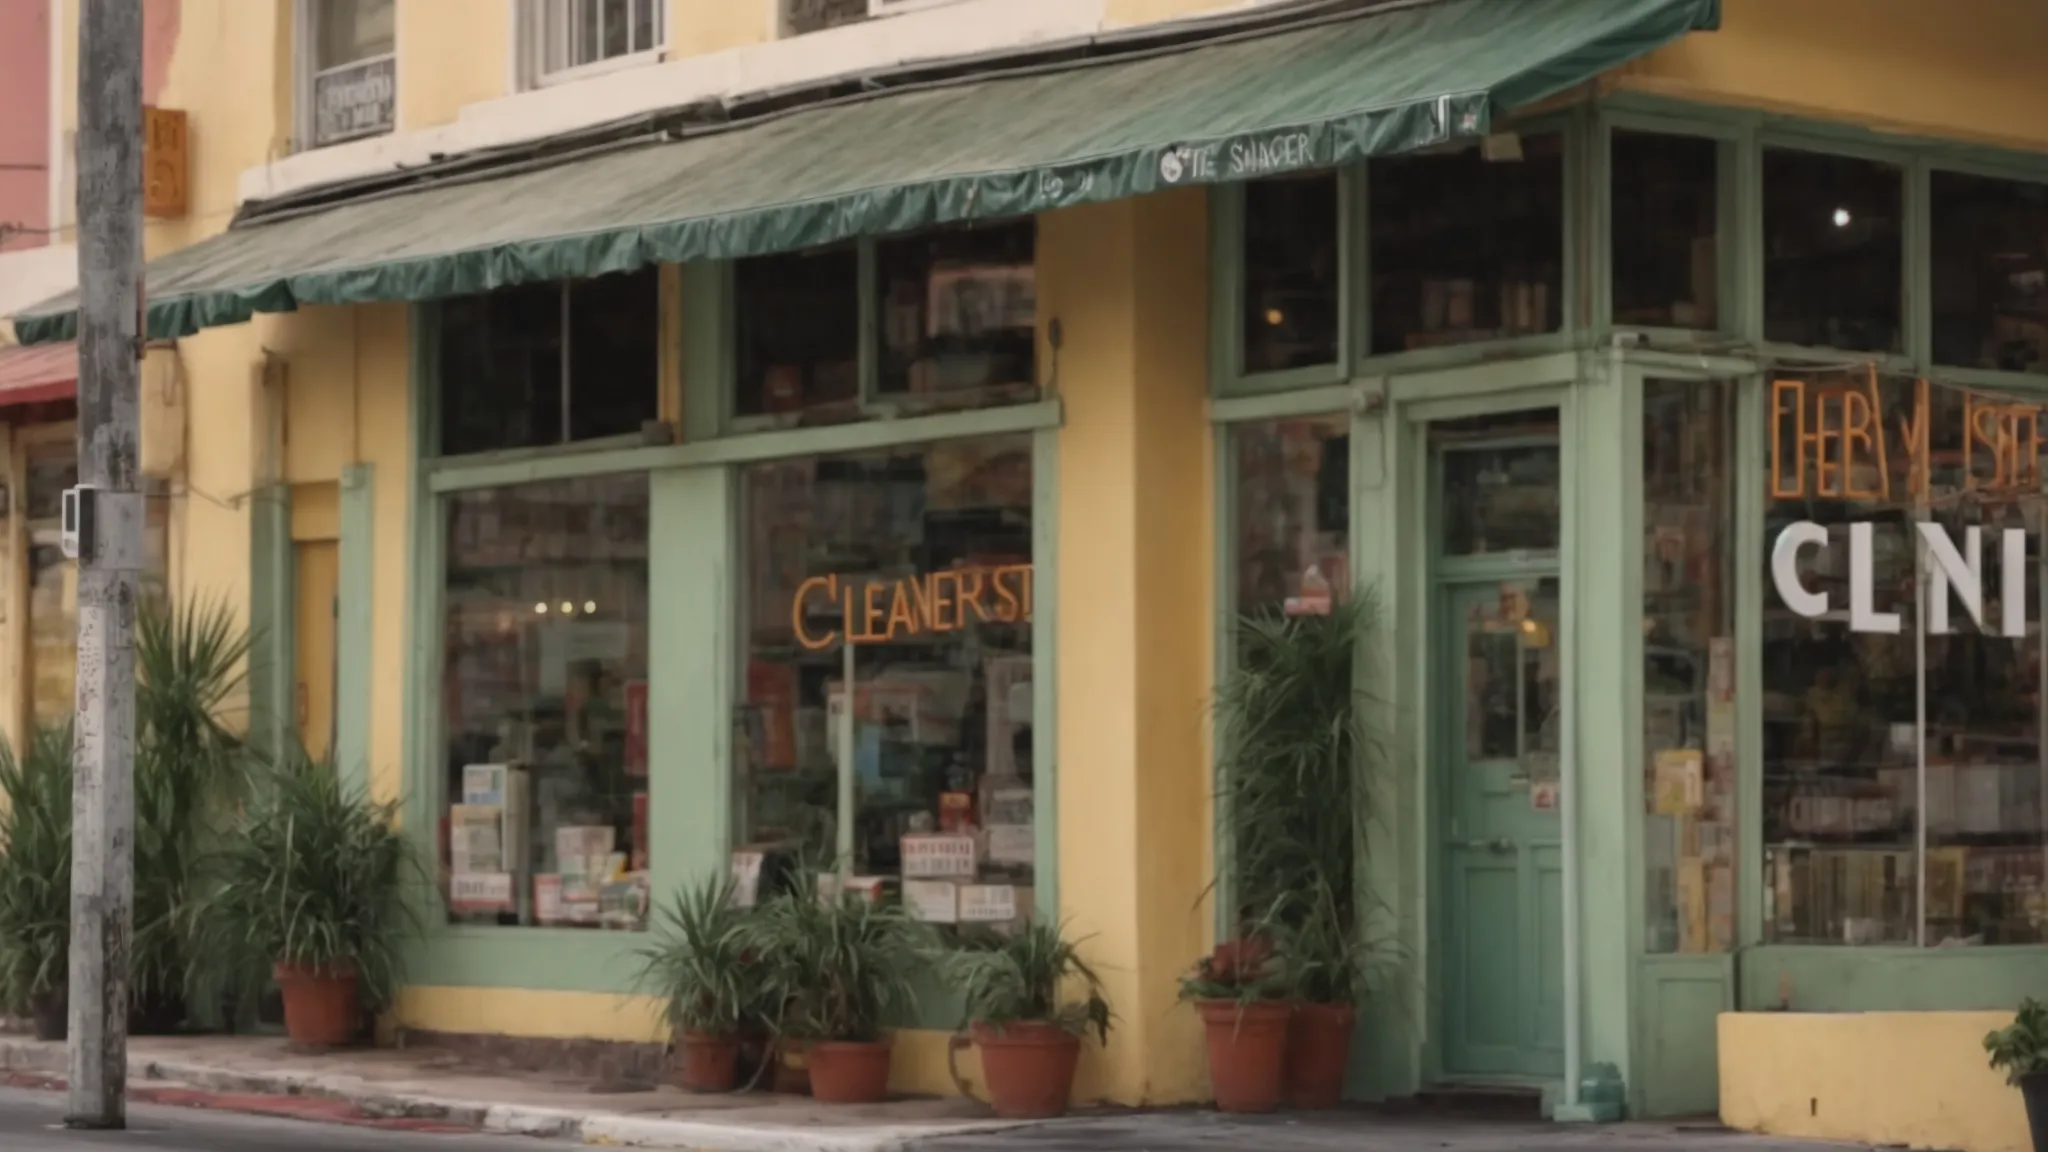 a bustling tampa street with a vibrant sage cleaners storefront, welcoming residents with open doors and a promise of value.